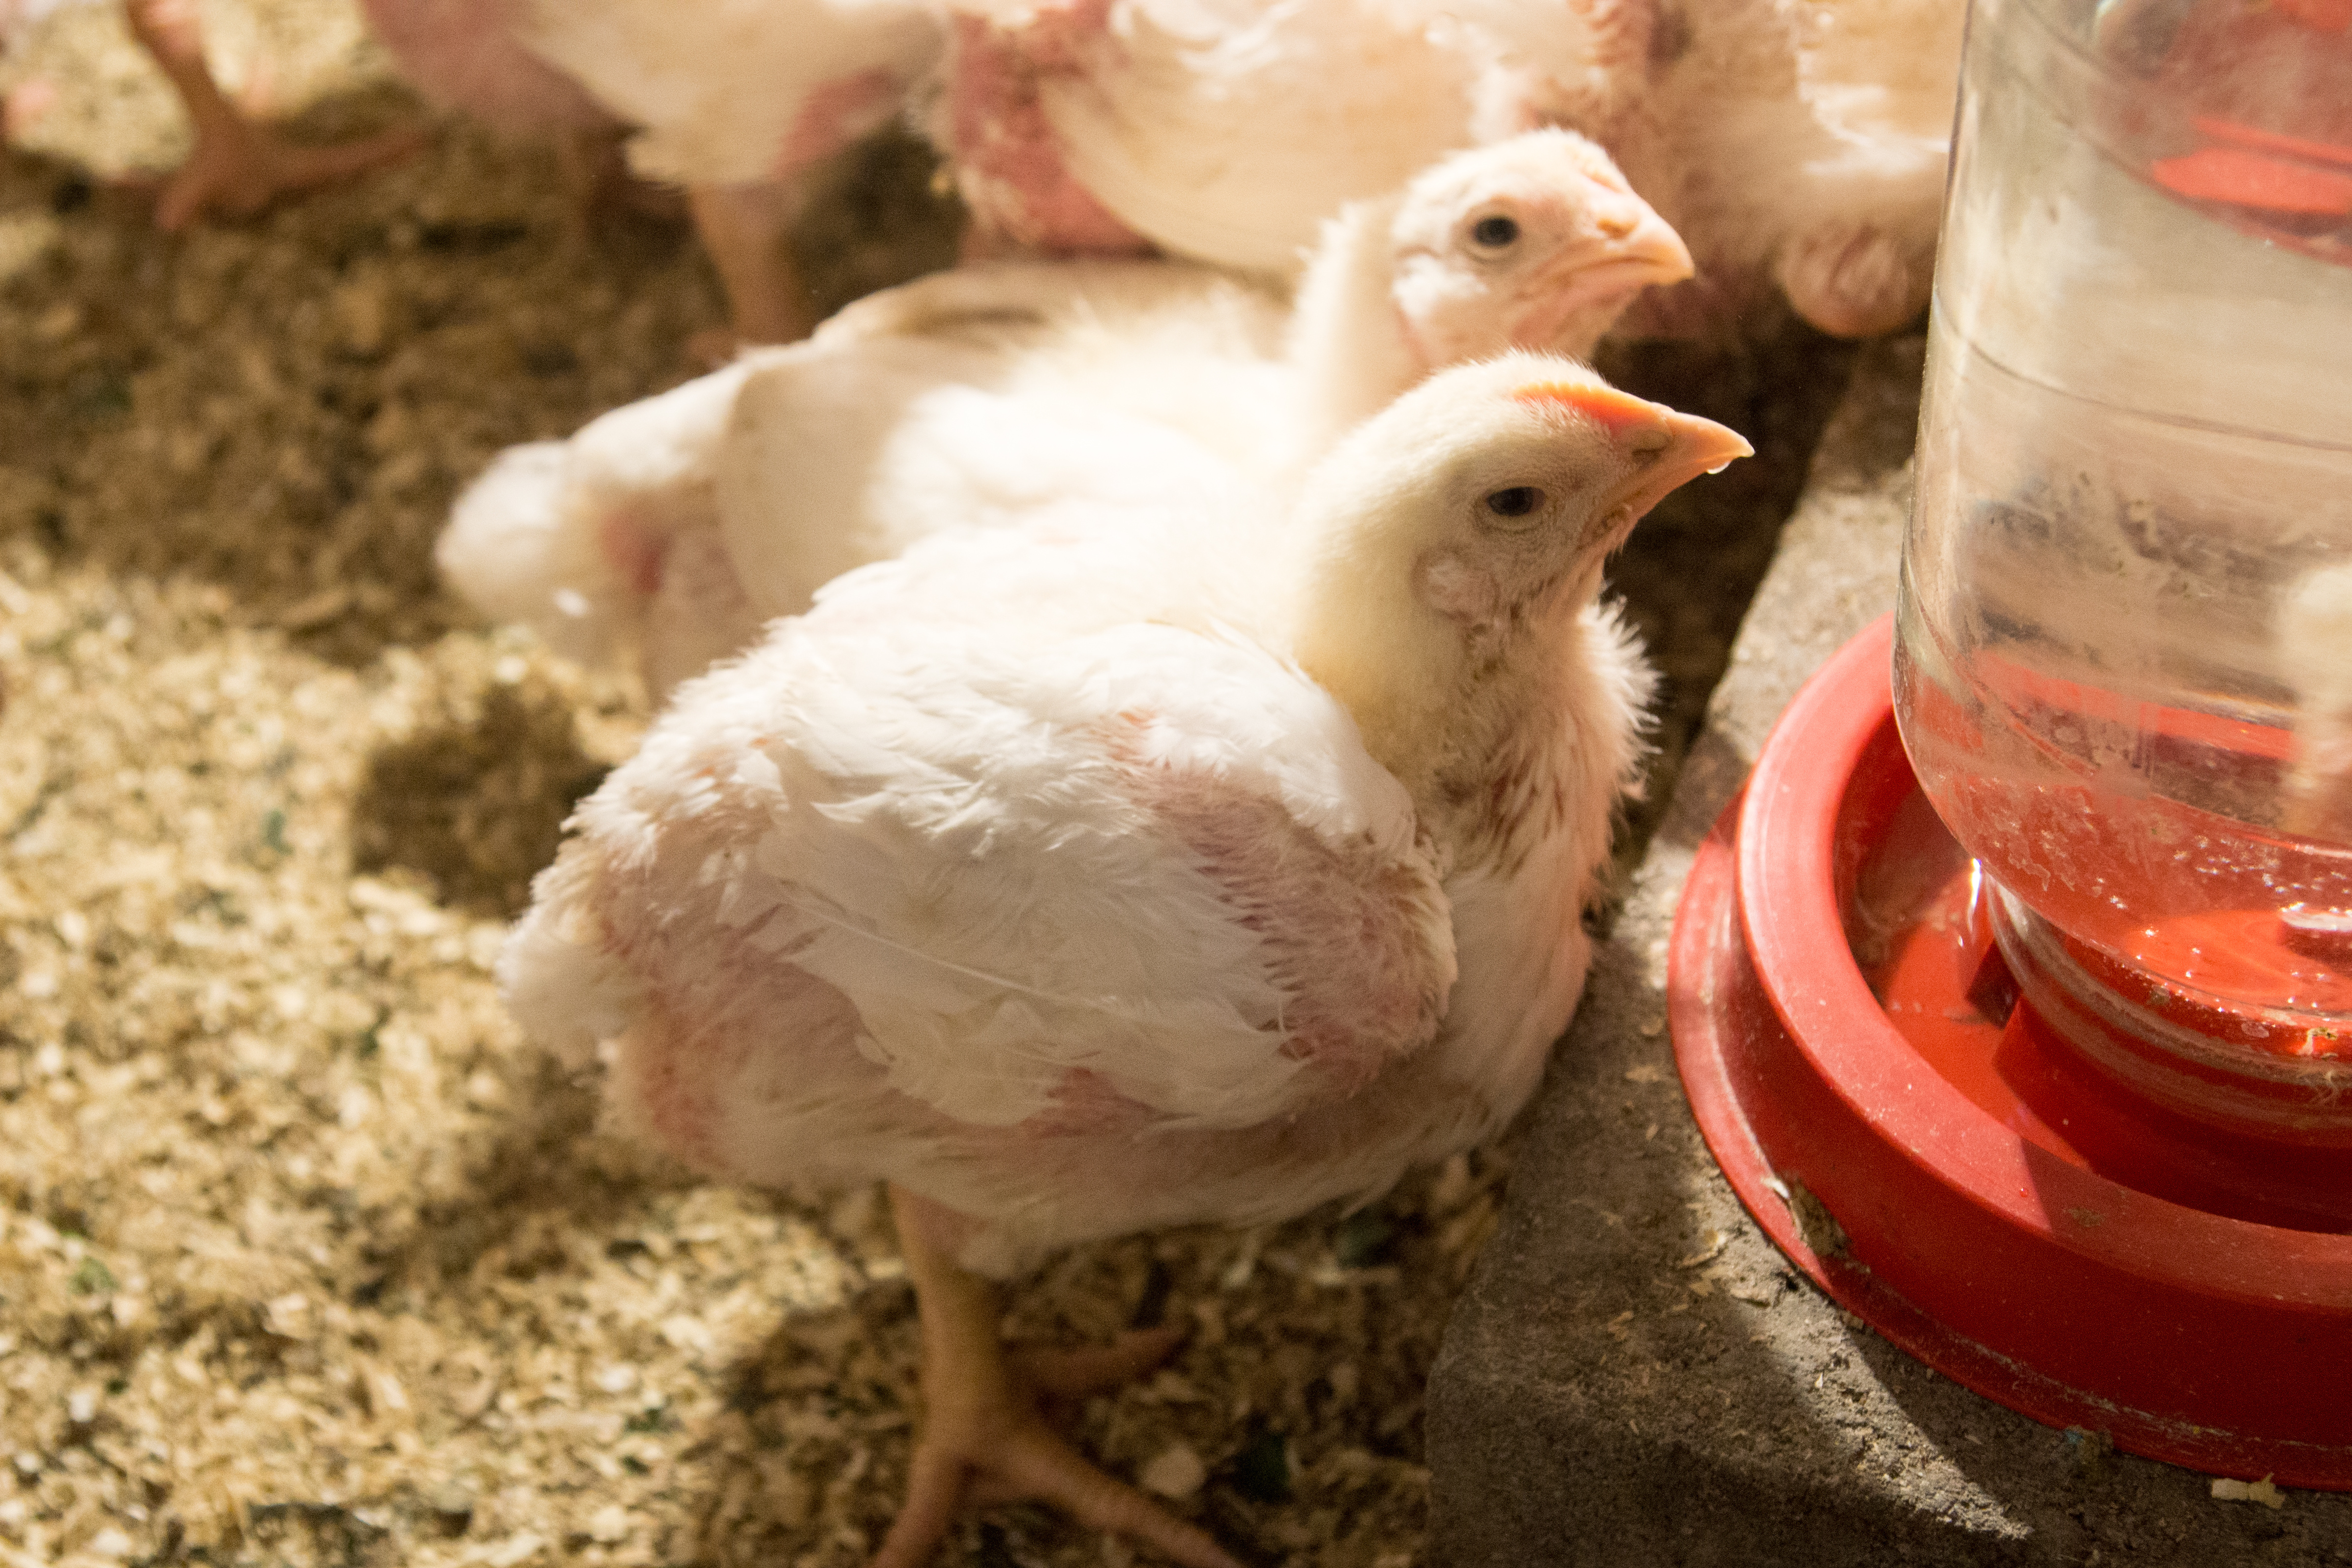 Replacing antibiotics in poultry feed has been a priority for producers